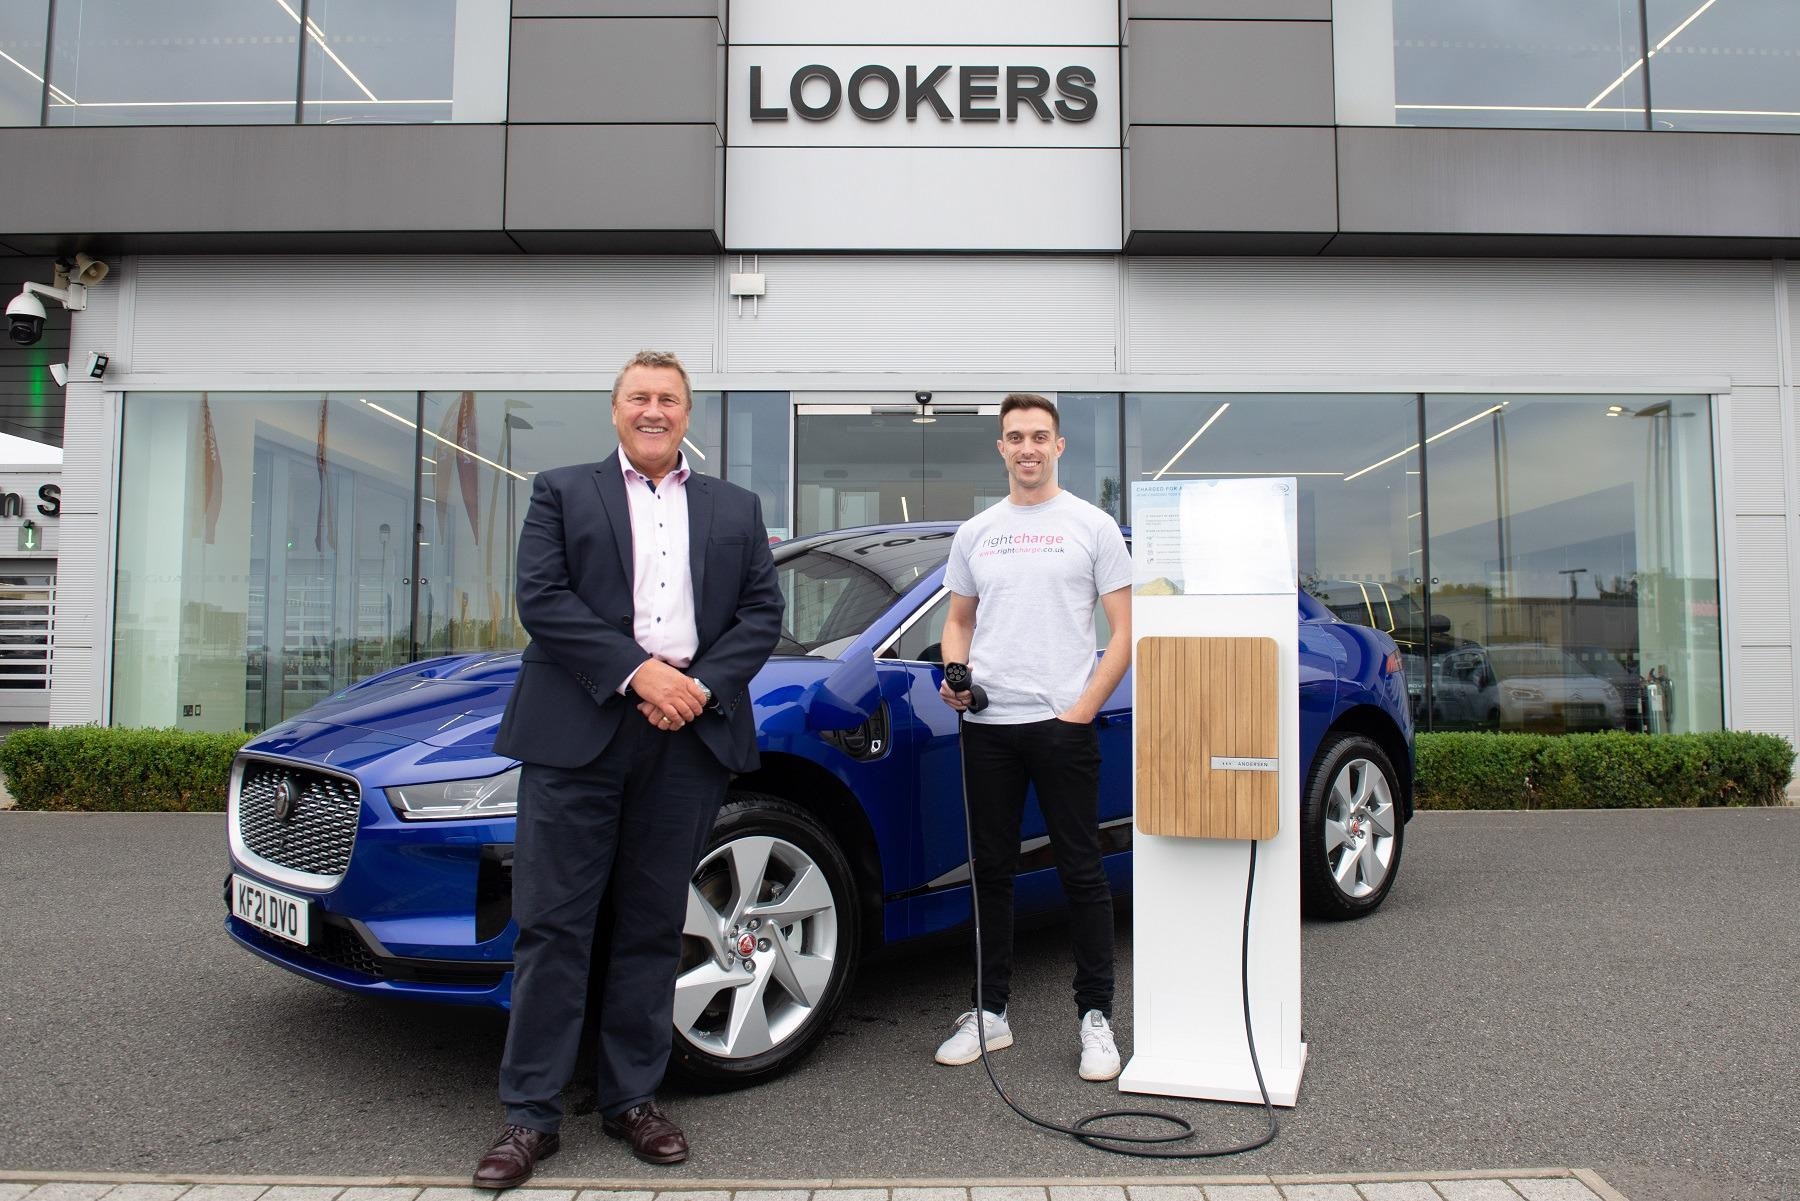 Lookers partners with Rightcharge